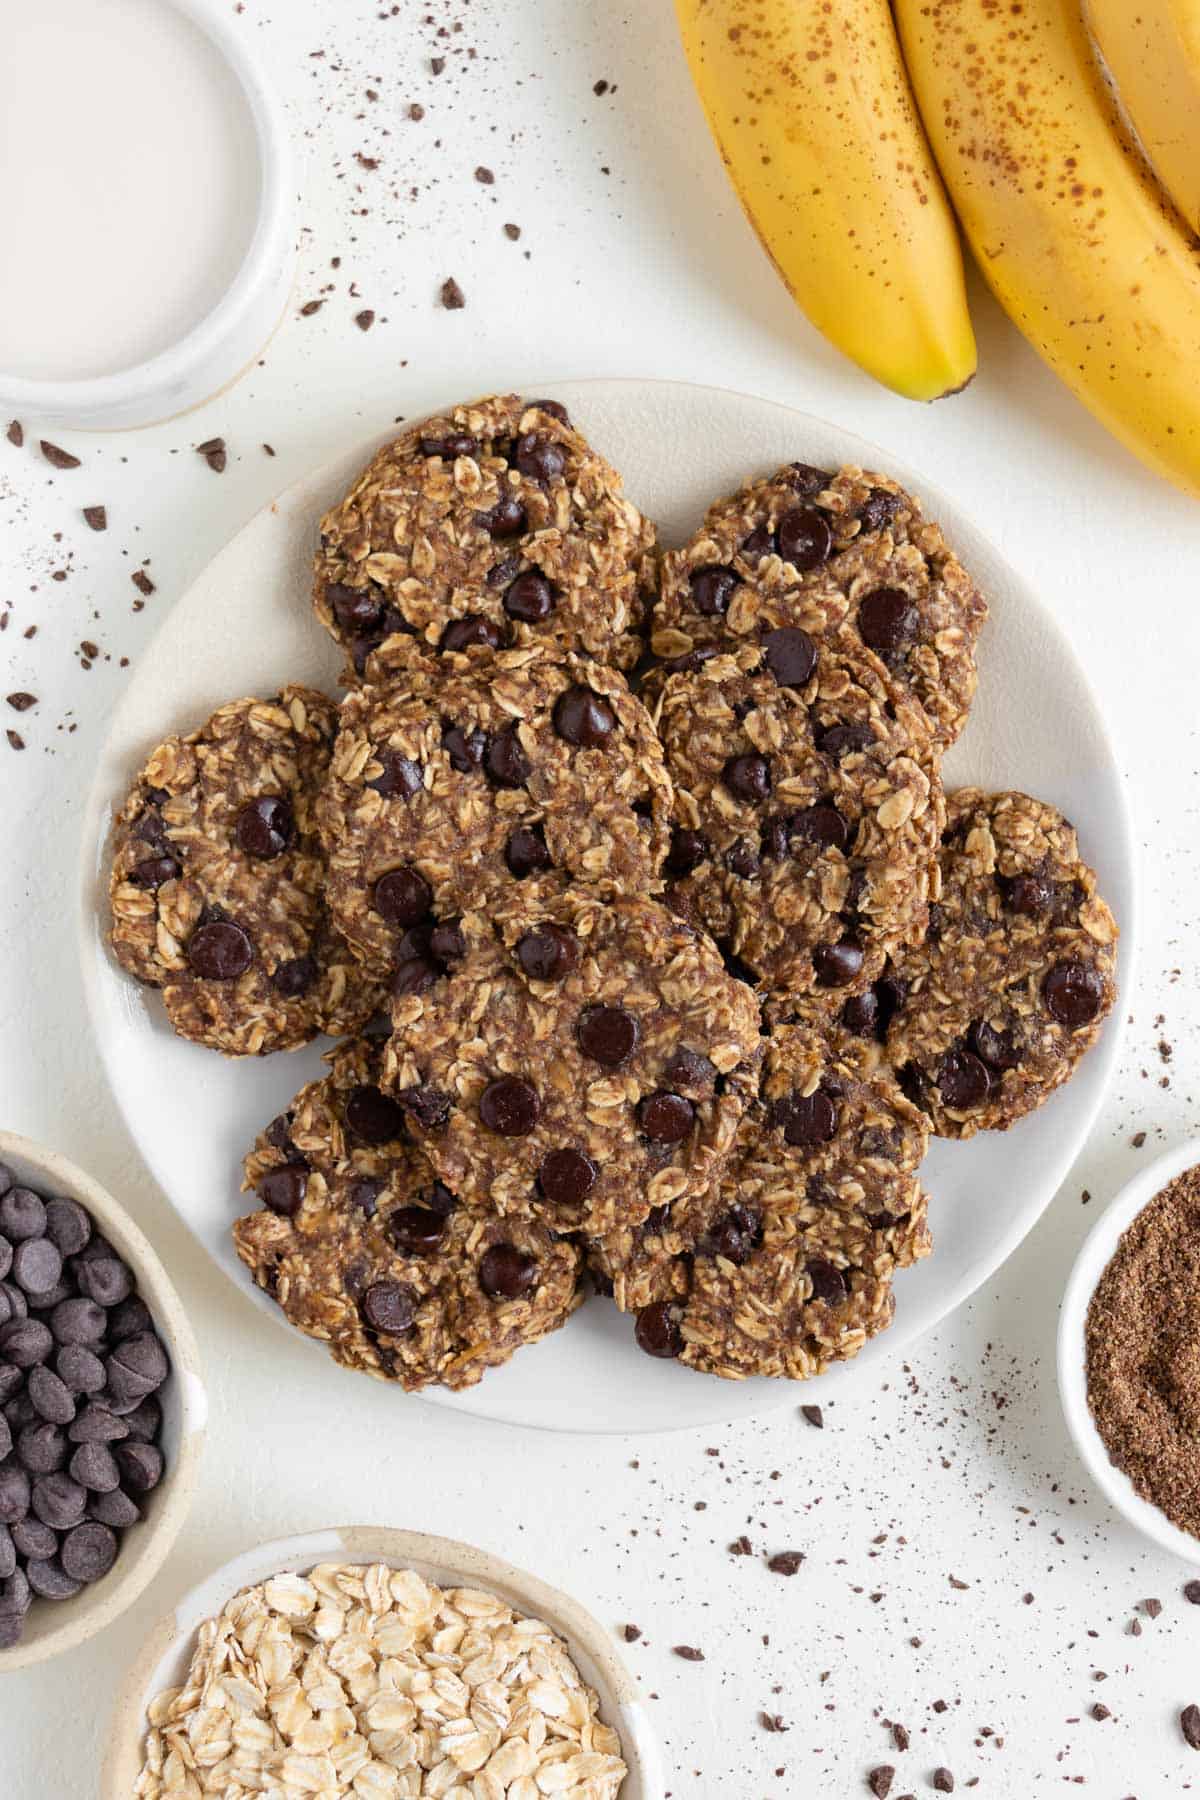 a plate of banana oatmeal chocolate chip cookies surrounded by a bundle of bananas, a glass of almond milk, a bowl of oats, and a bowl of chocolate